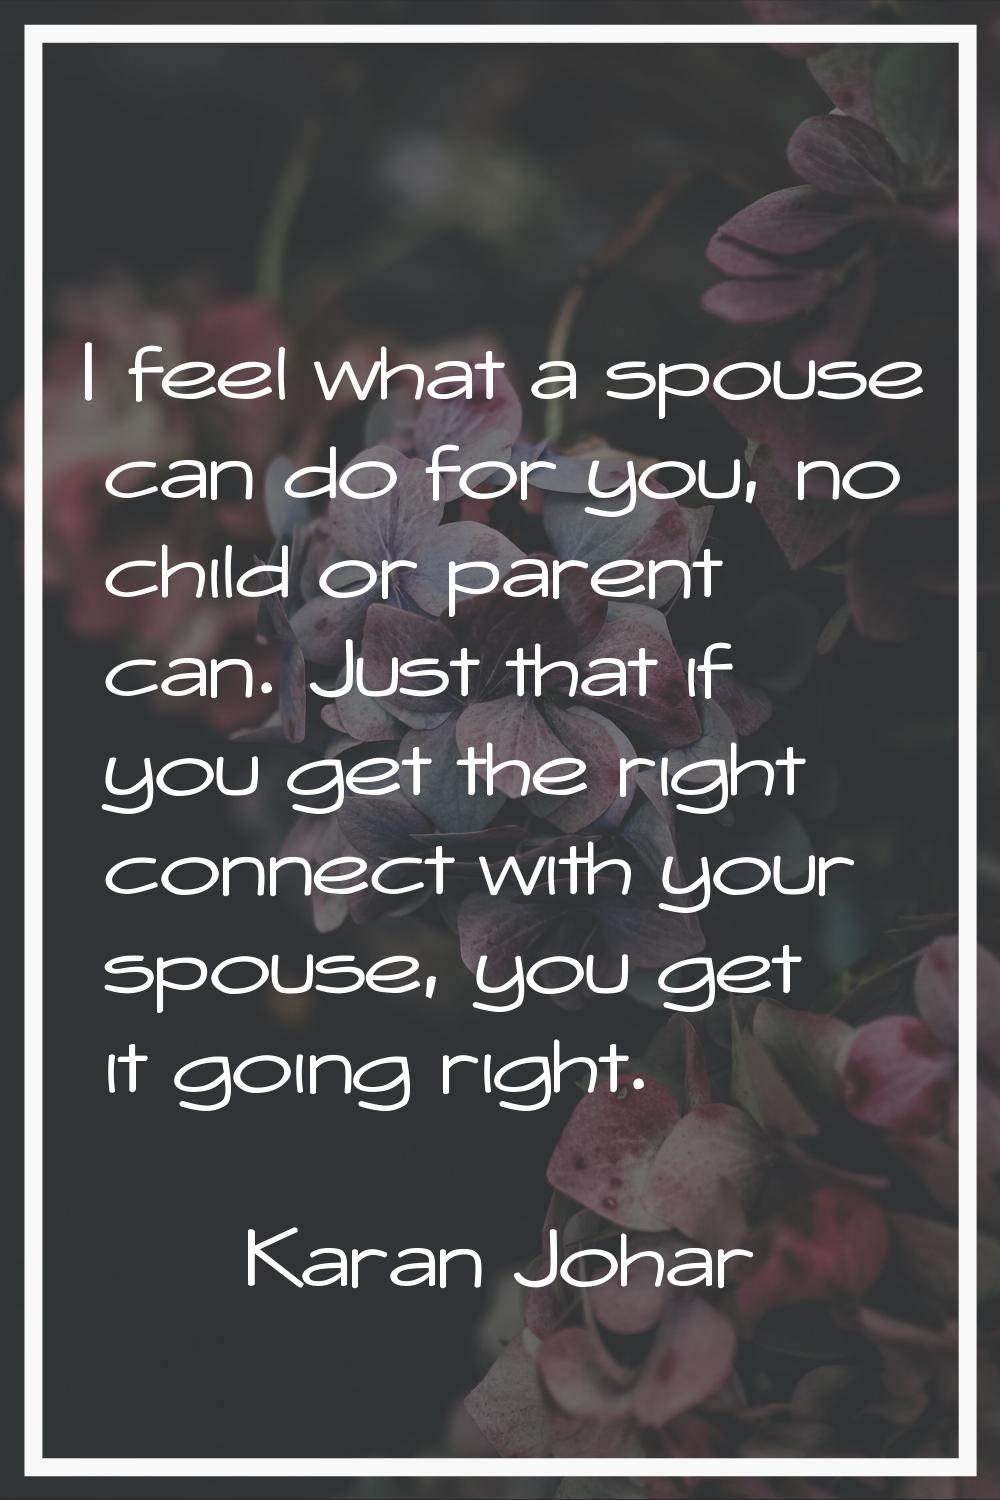 I feel what a spouse can do for you, no child or parent can. Just that if you get the right connect